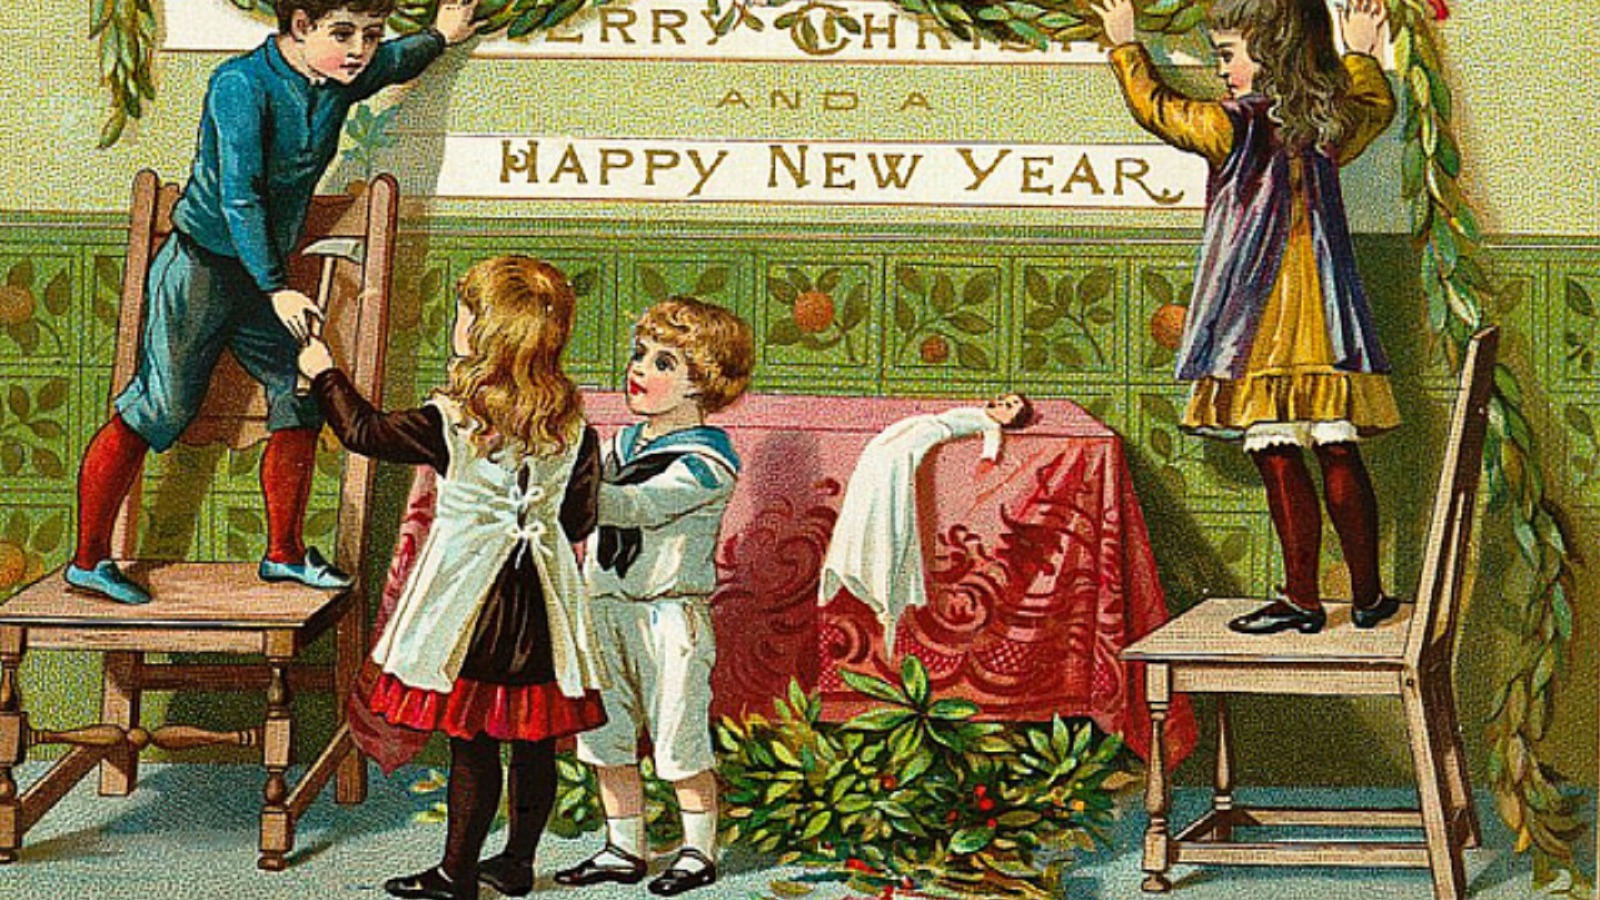 Vintage Merry Christmas & Happy New Year image.